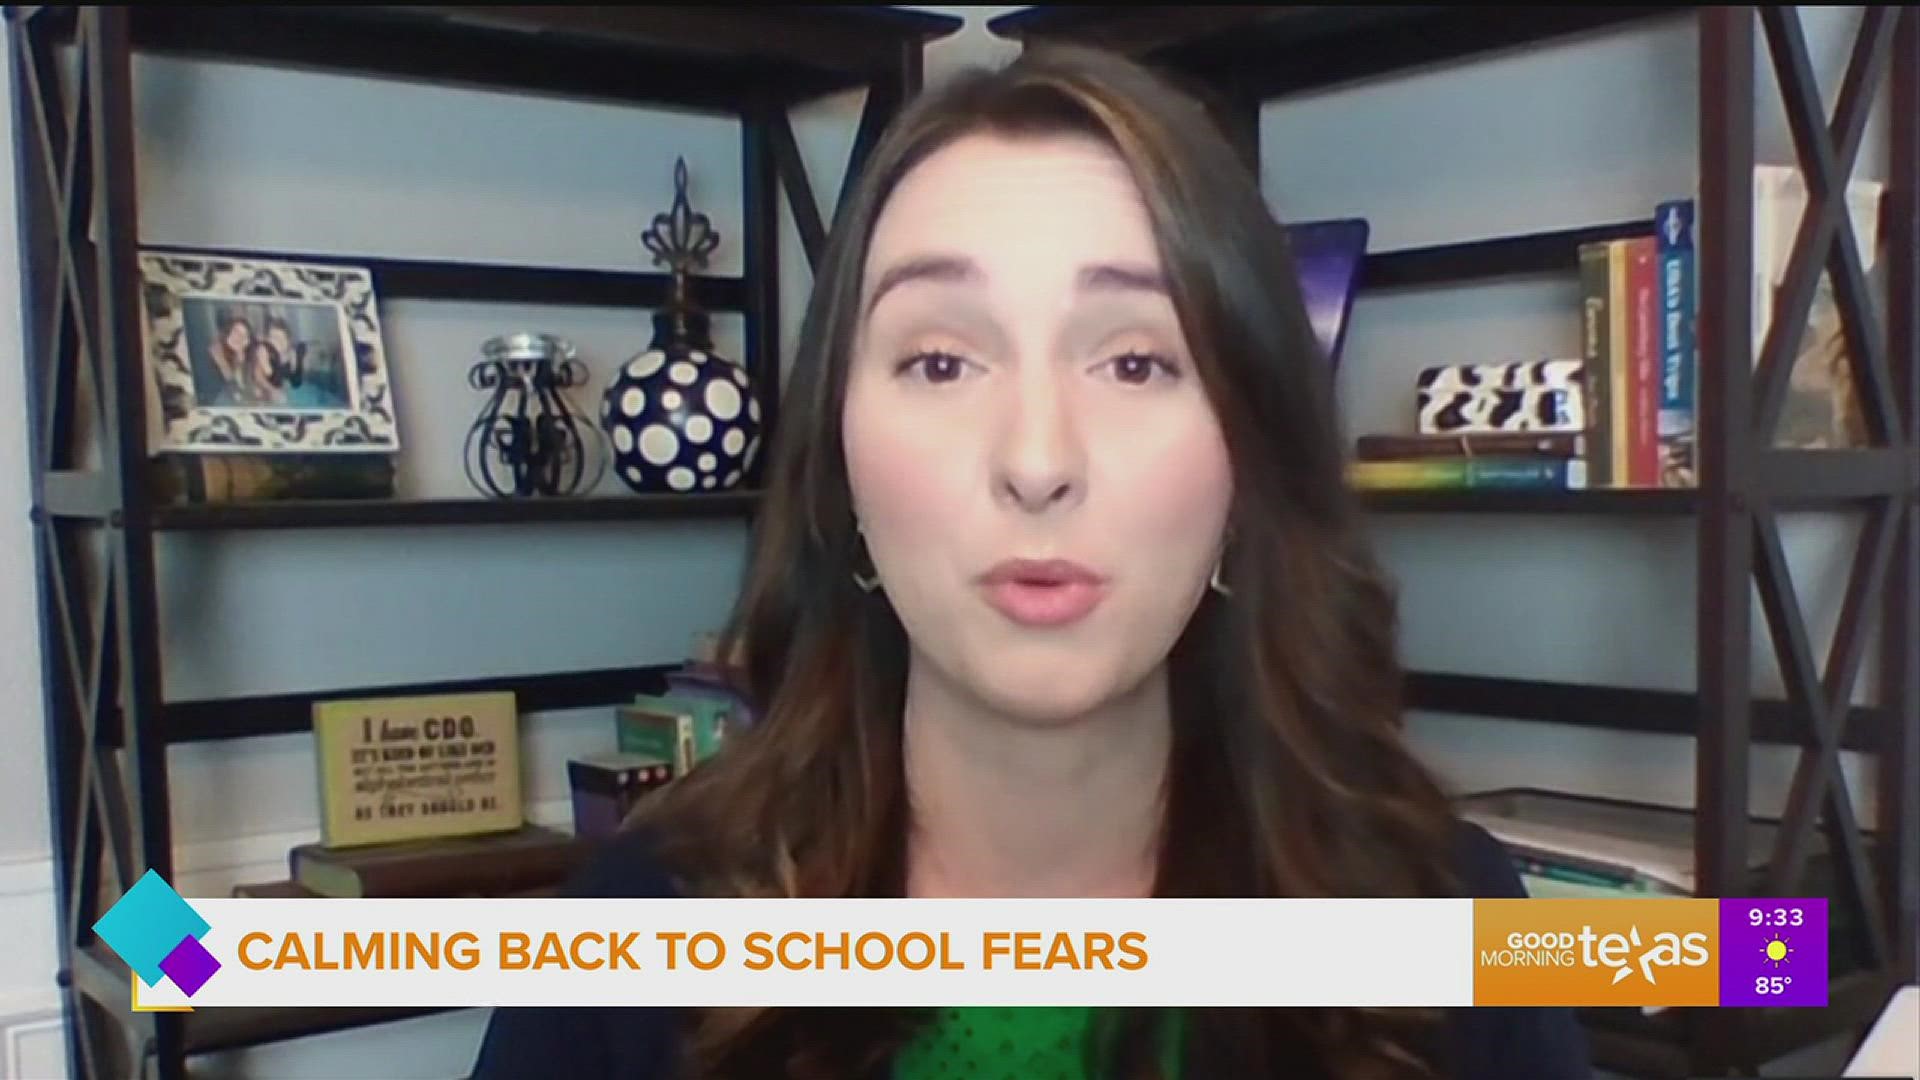 Kathryn Thalken with TheParentingCenter.org joined Good Morning Texas to share tips for parents about how to calm their child's anxiety about going back to school.